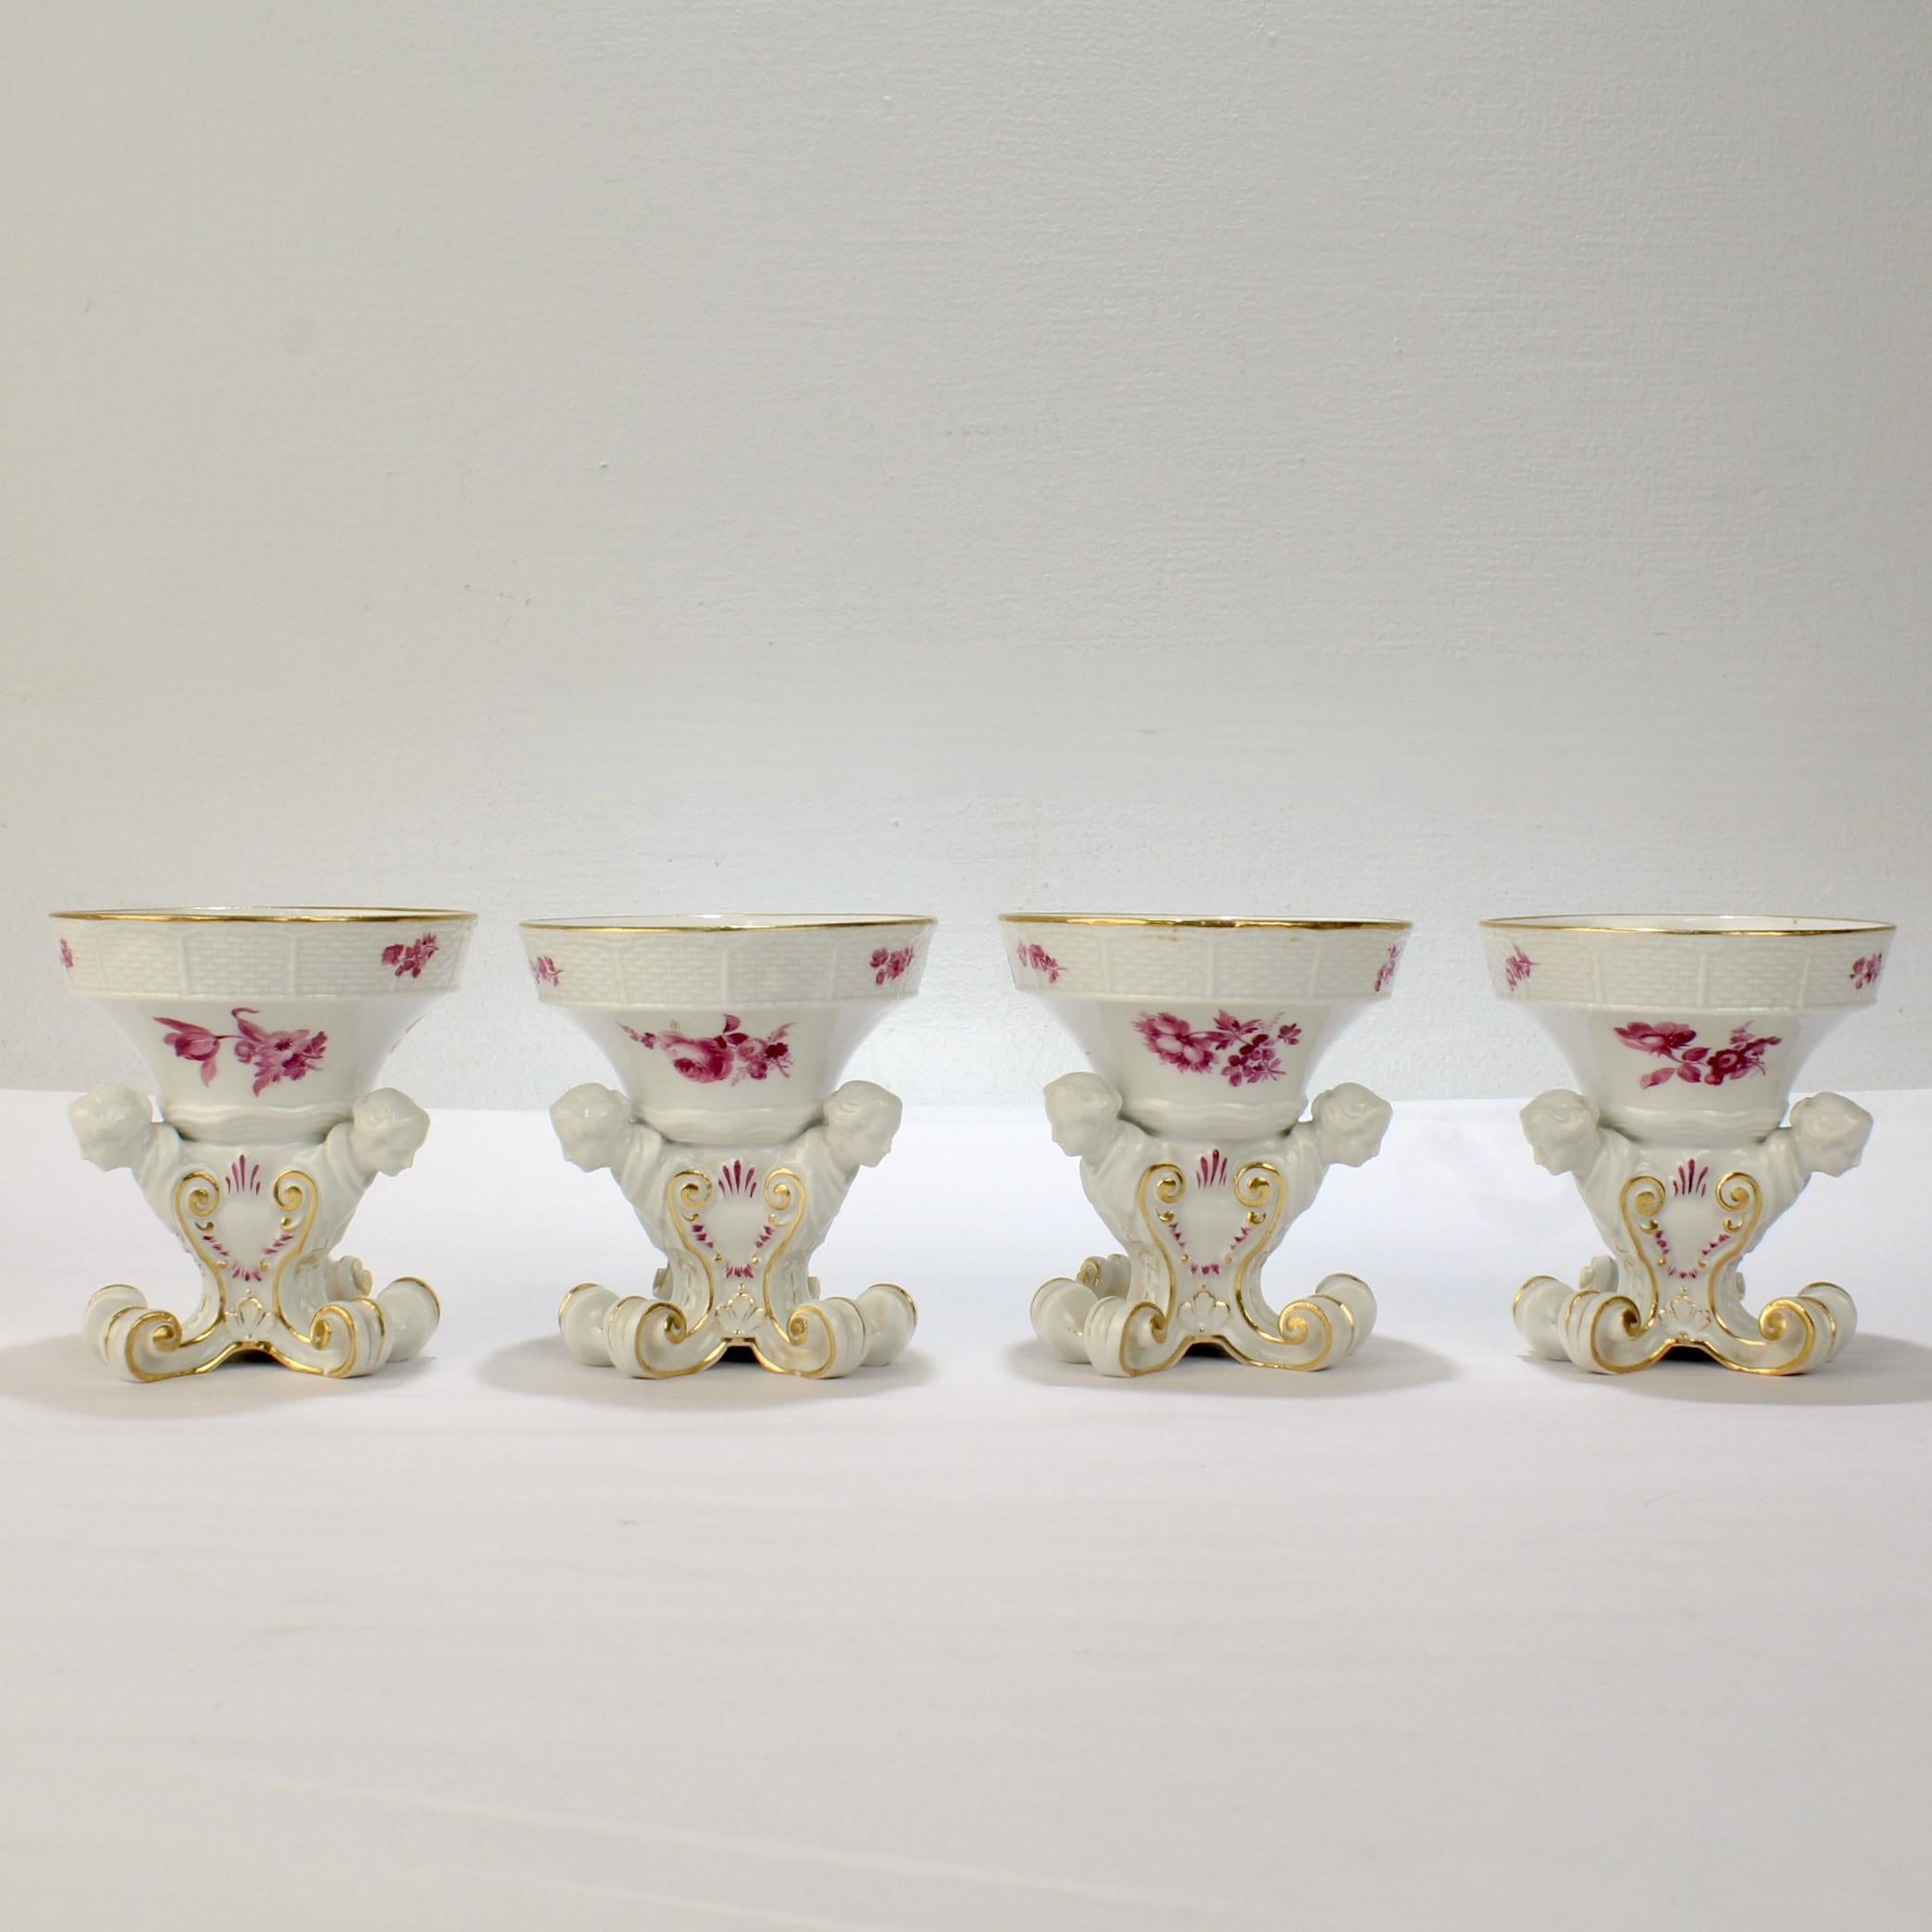 A very fine set of 4 antique Meissen porcelain salt cellars.

Modelled after salts originally designed for the Sulkowski service by Johann Friedrich Eberlein (1696-1749). 

Having a tapered, circular bowl with basketweave border, painted with